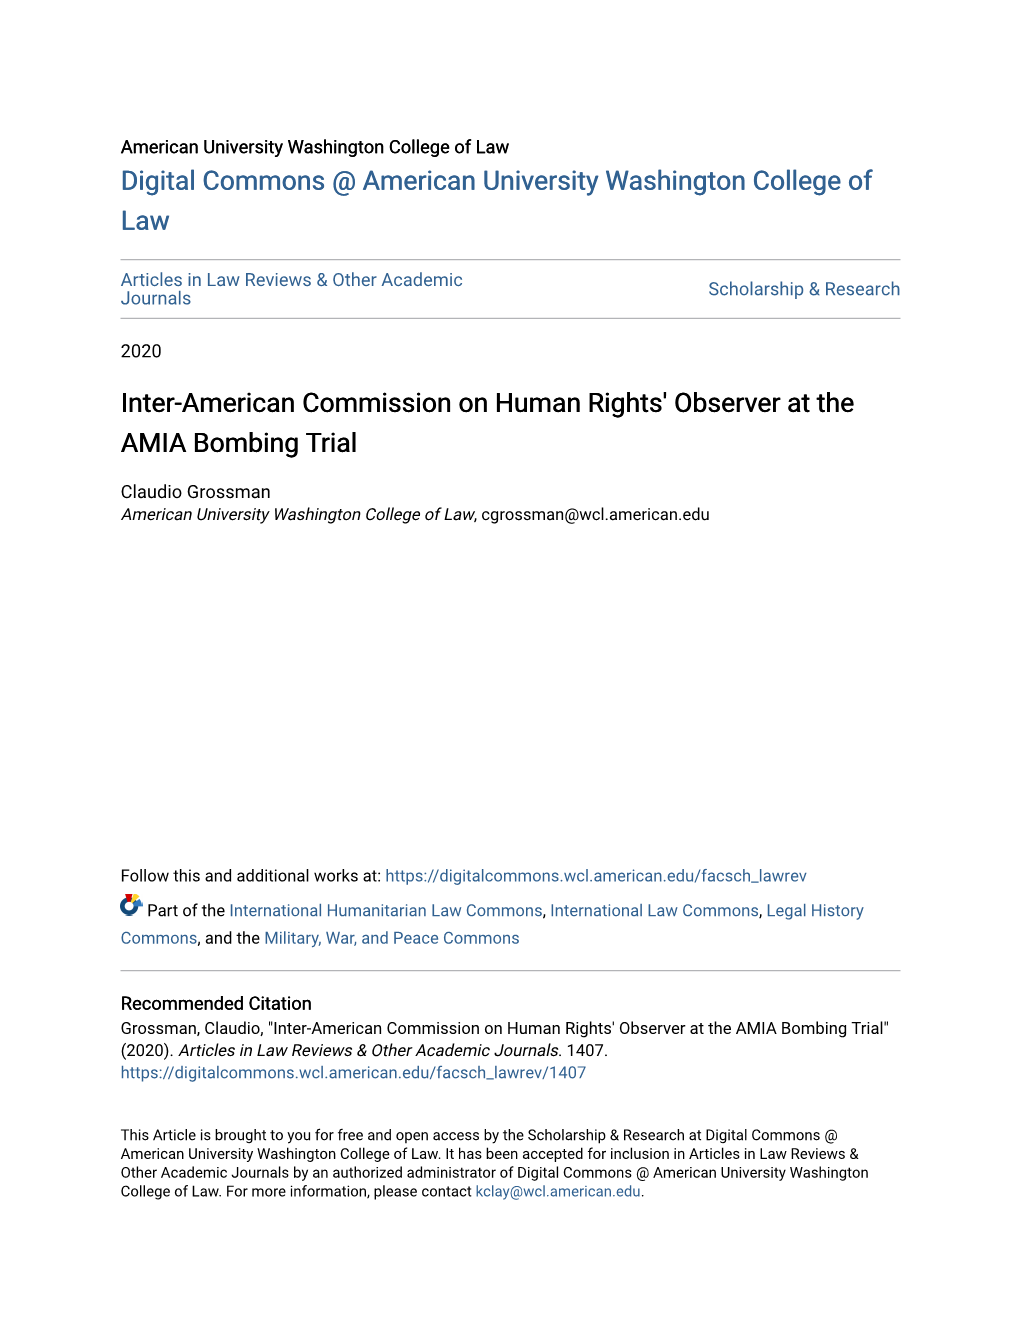 Inter-American Commission on Human Rights' Observer at the AMIA Bombing Trial